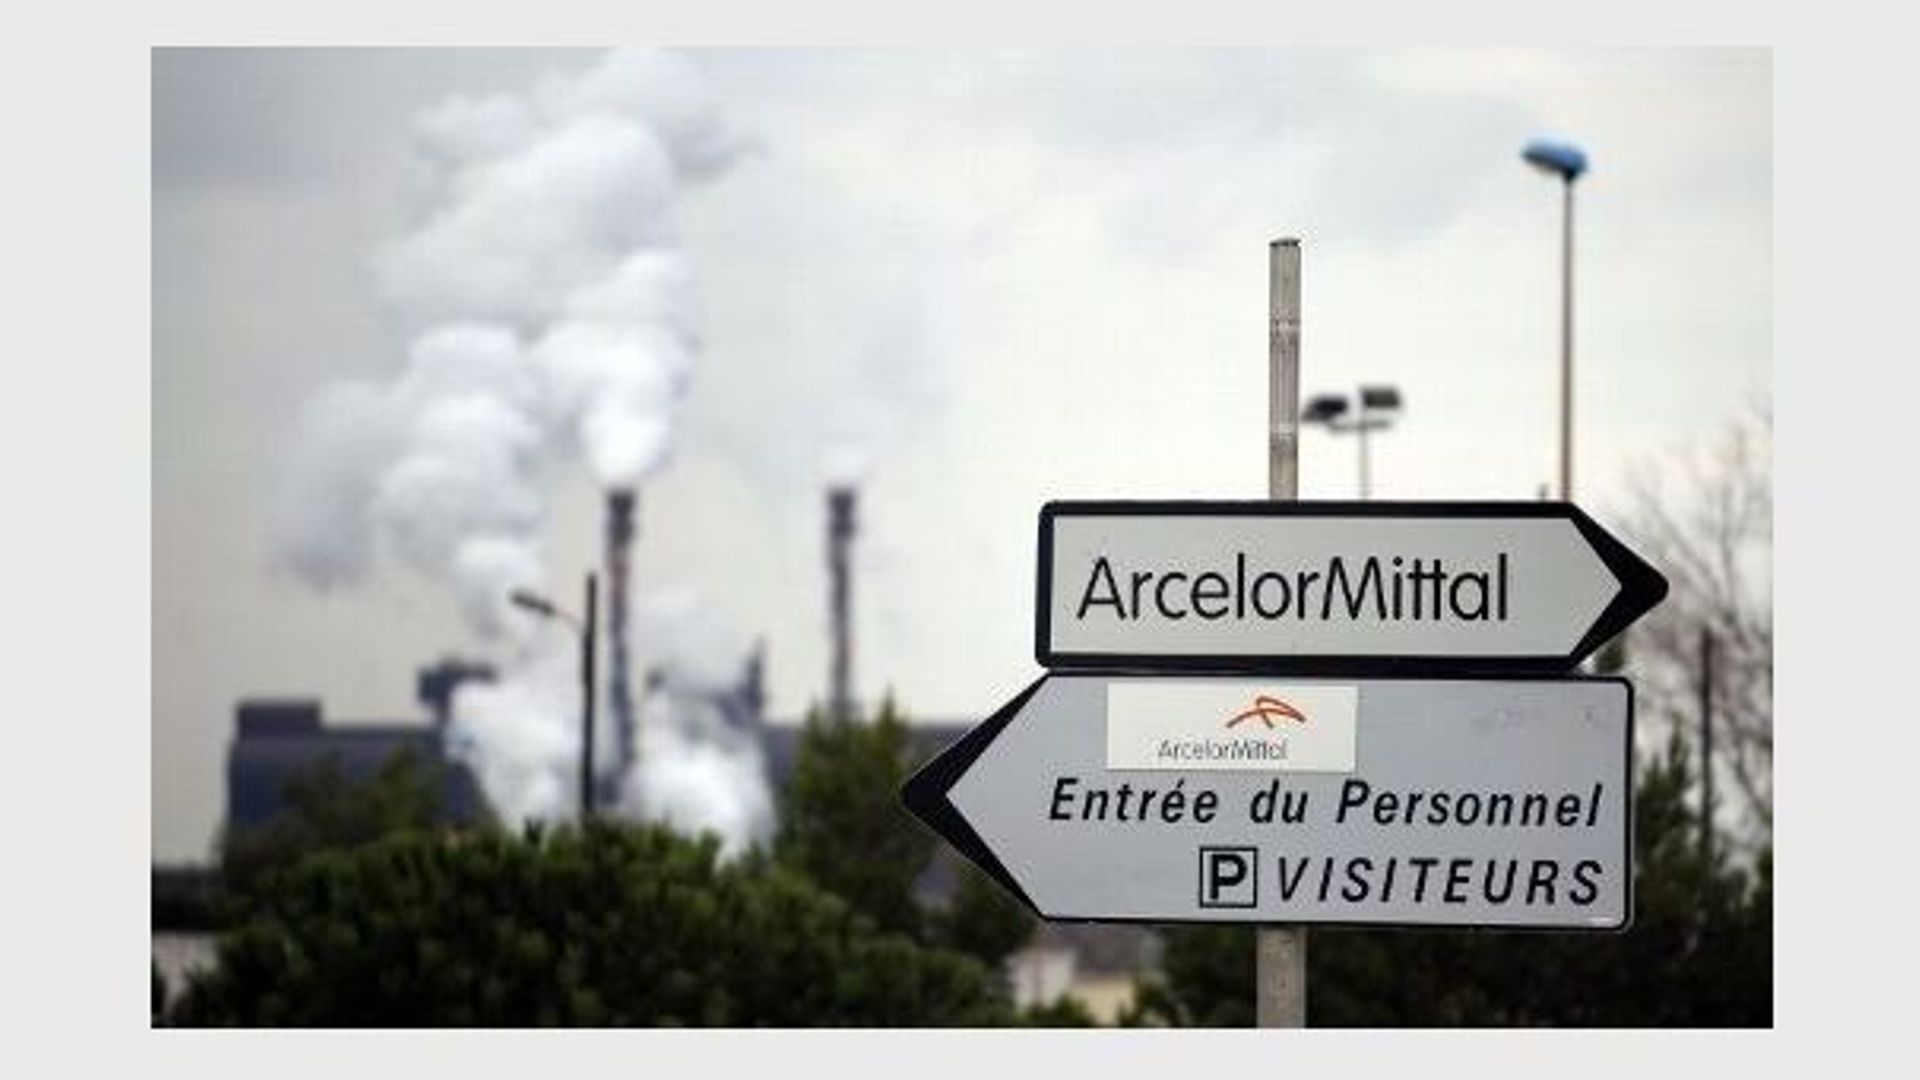 arcelormittal-investira-138-millions-d-euros-dans-la-phase-a-froid-liegeoise